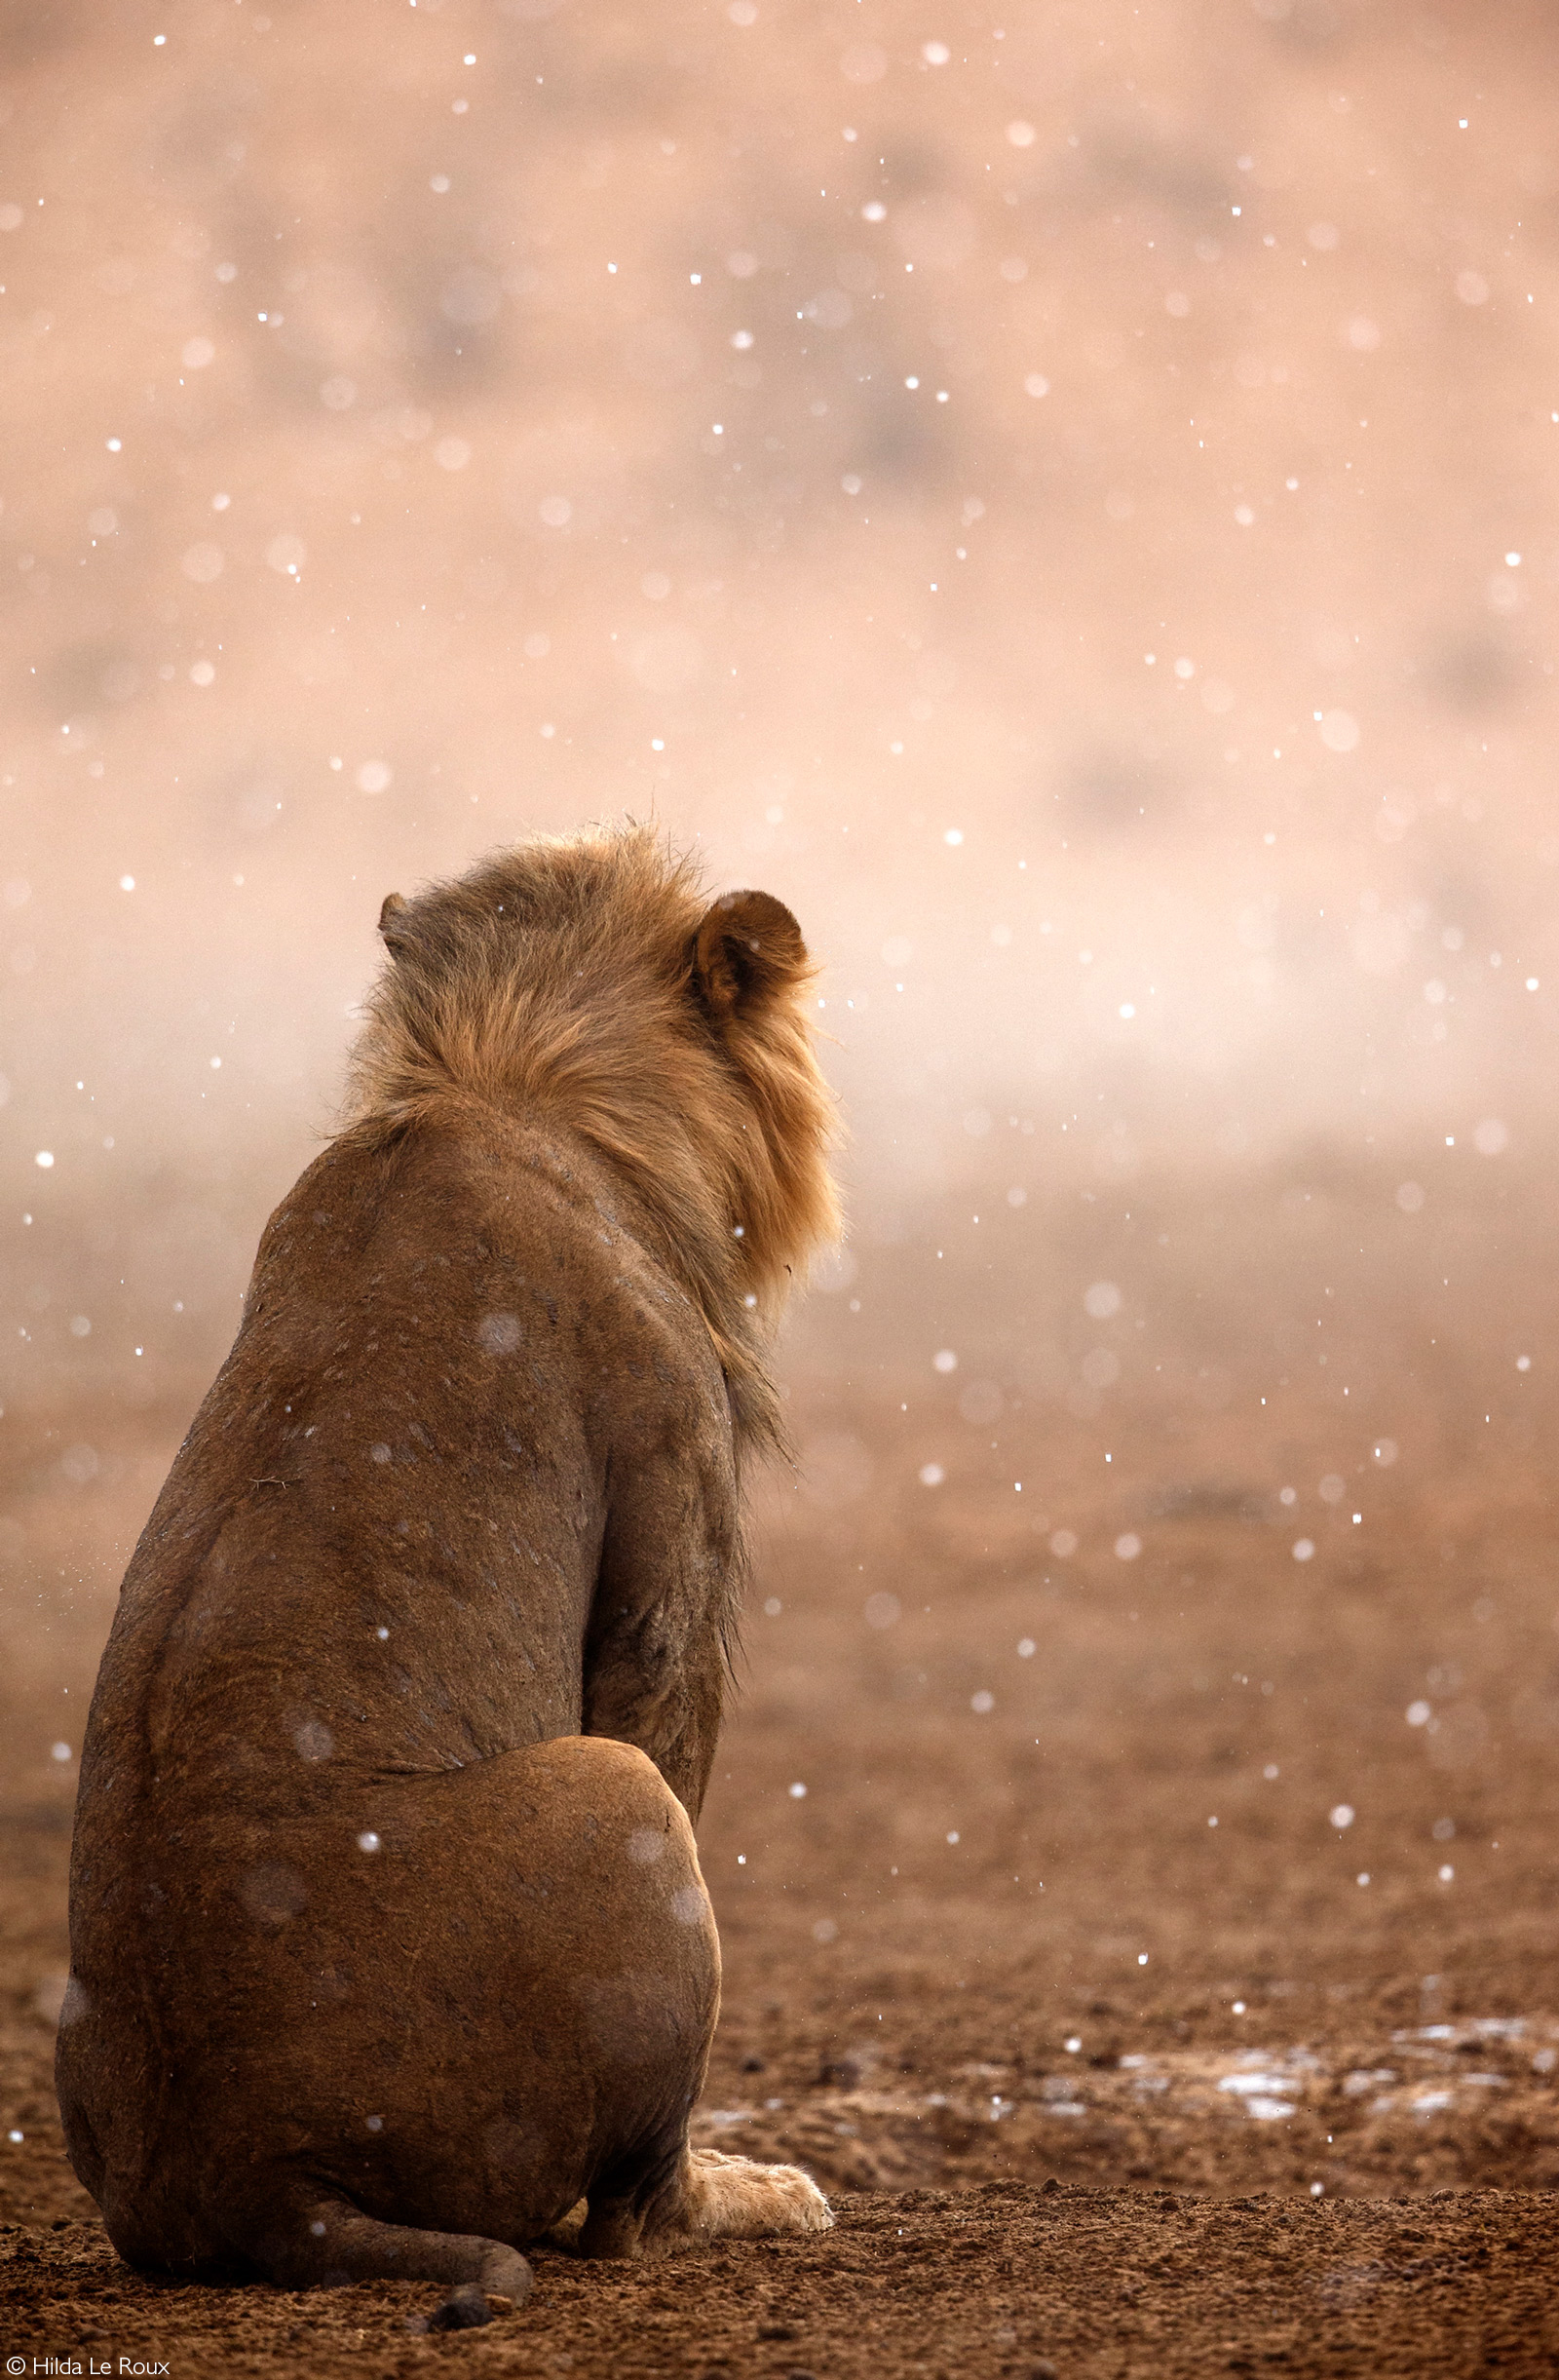 A lion sits in the rain. Kgalagadi Transfrontier Park, South Africa © Hilda Le Roux